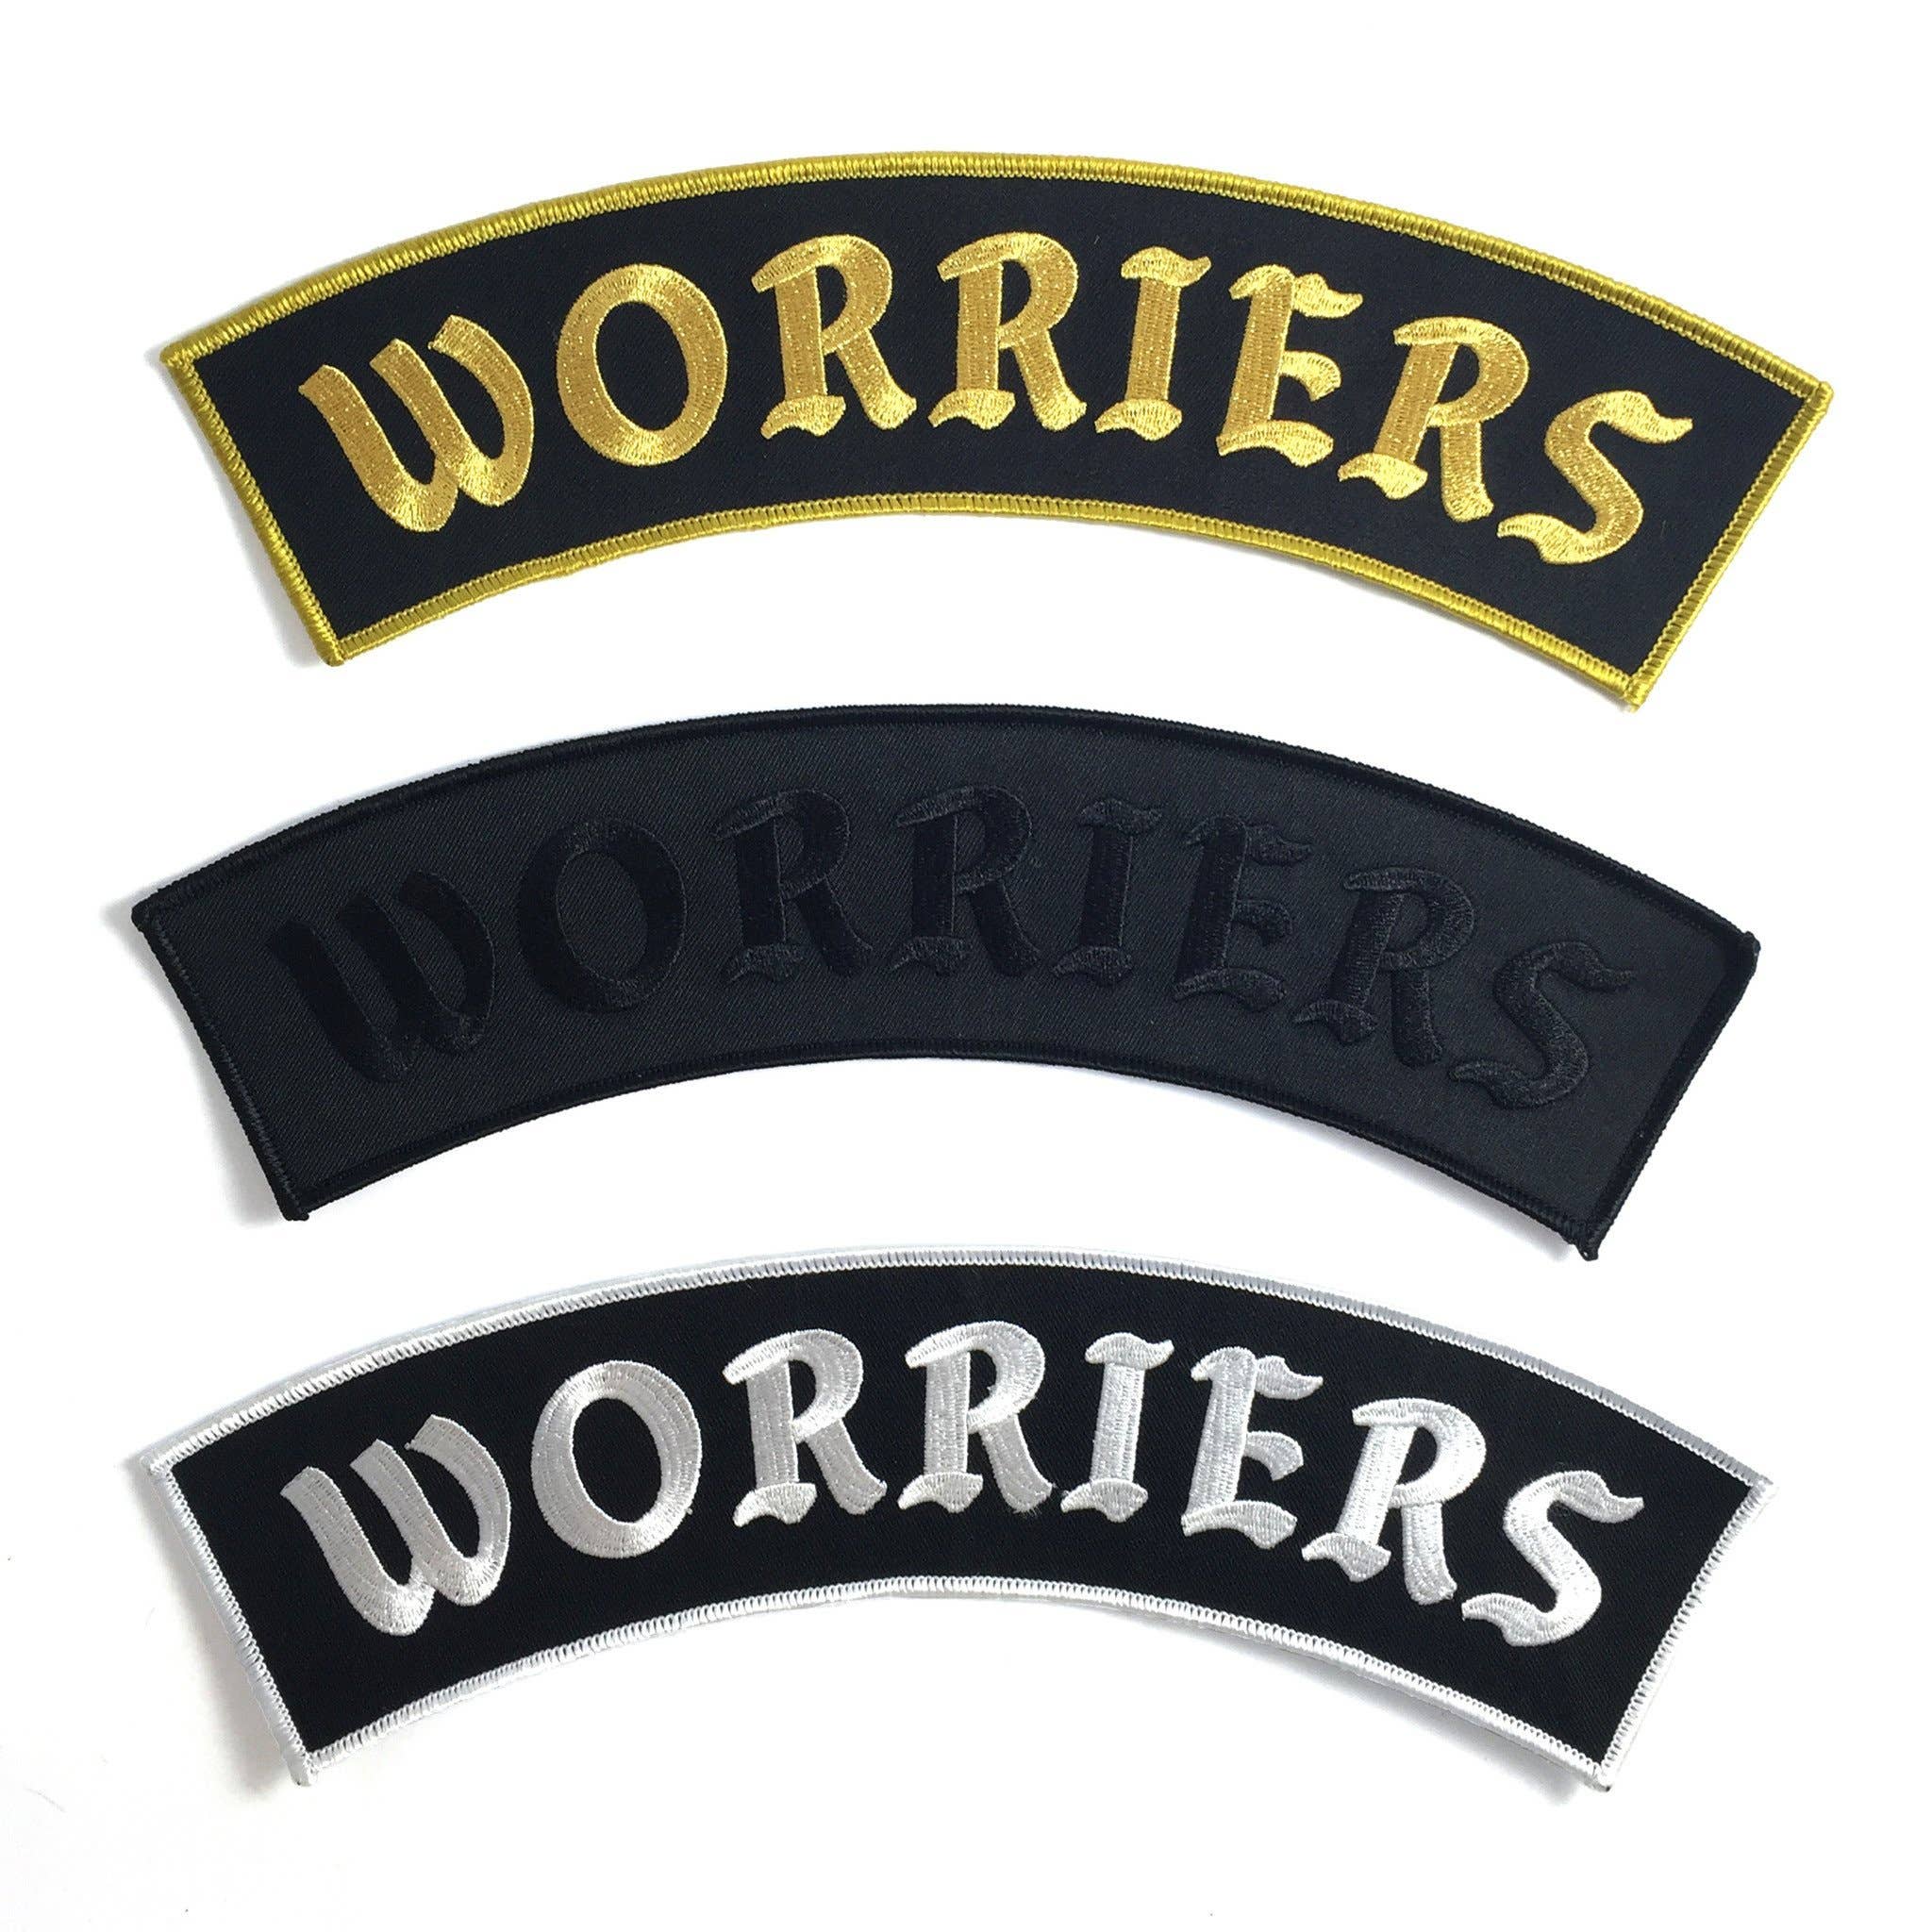 Worriers Anxiety Club - Back Patches: Rocker / Skull Set - Gold